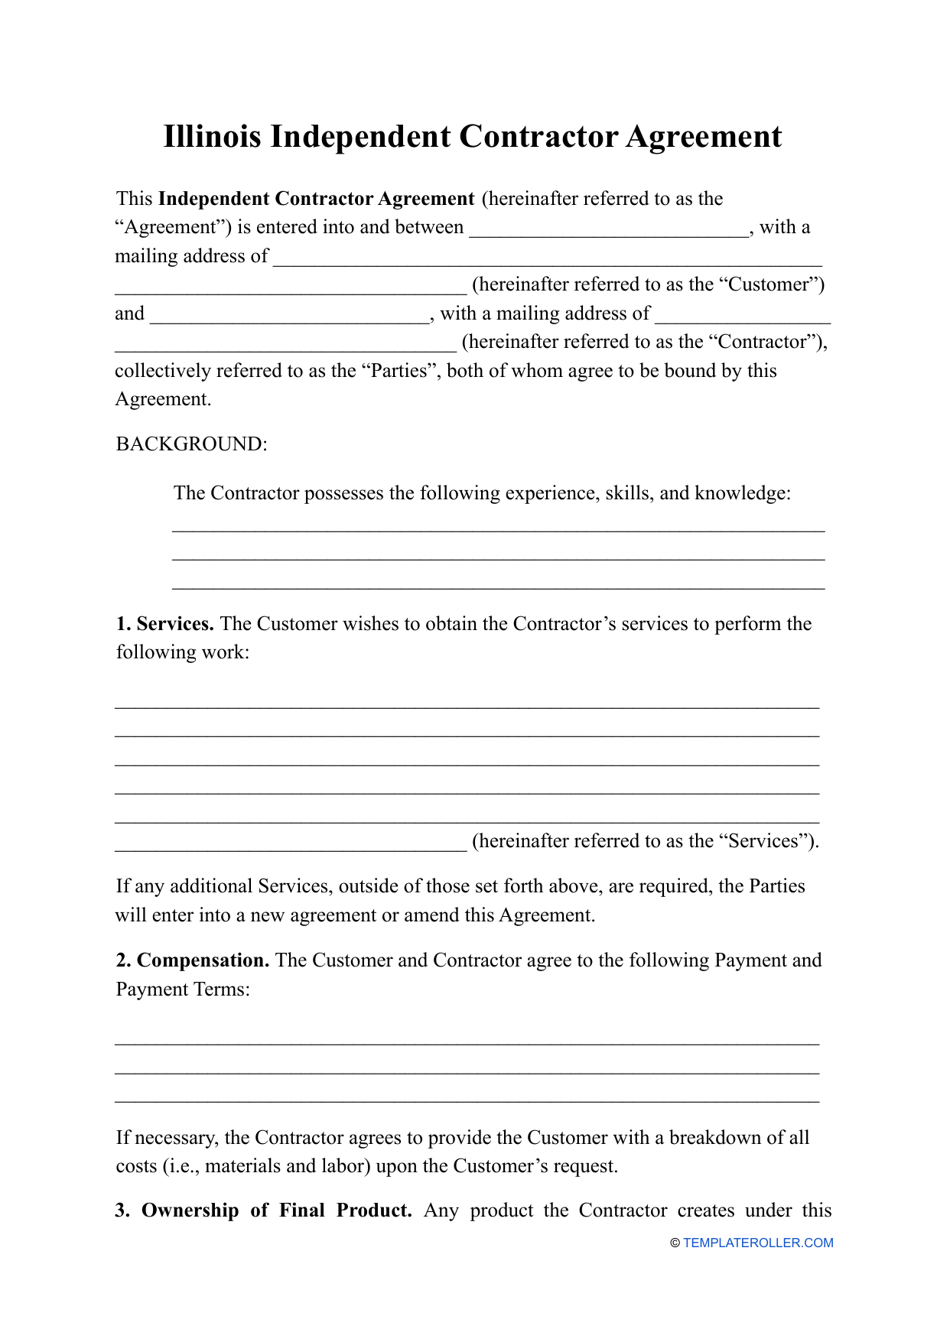 Independent Contractor Agreement Template - Illinois, Page 1